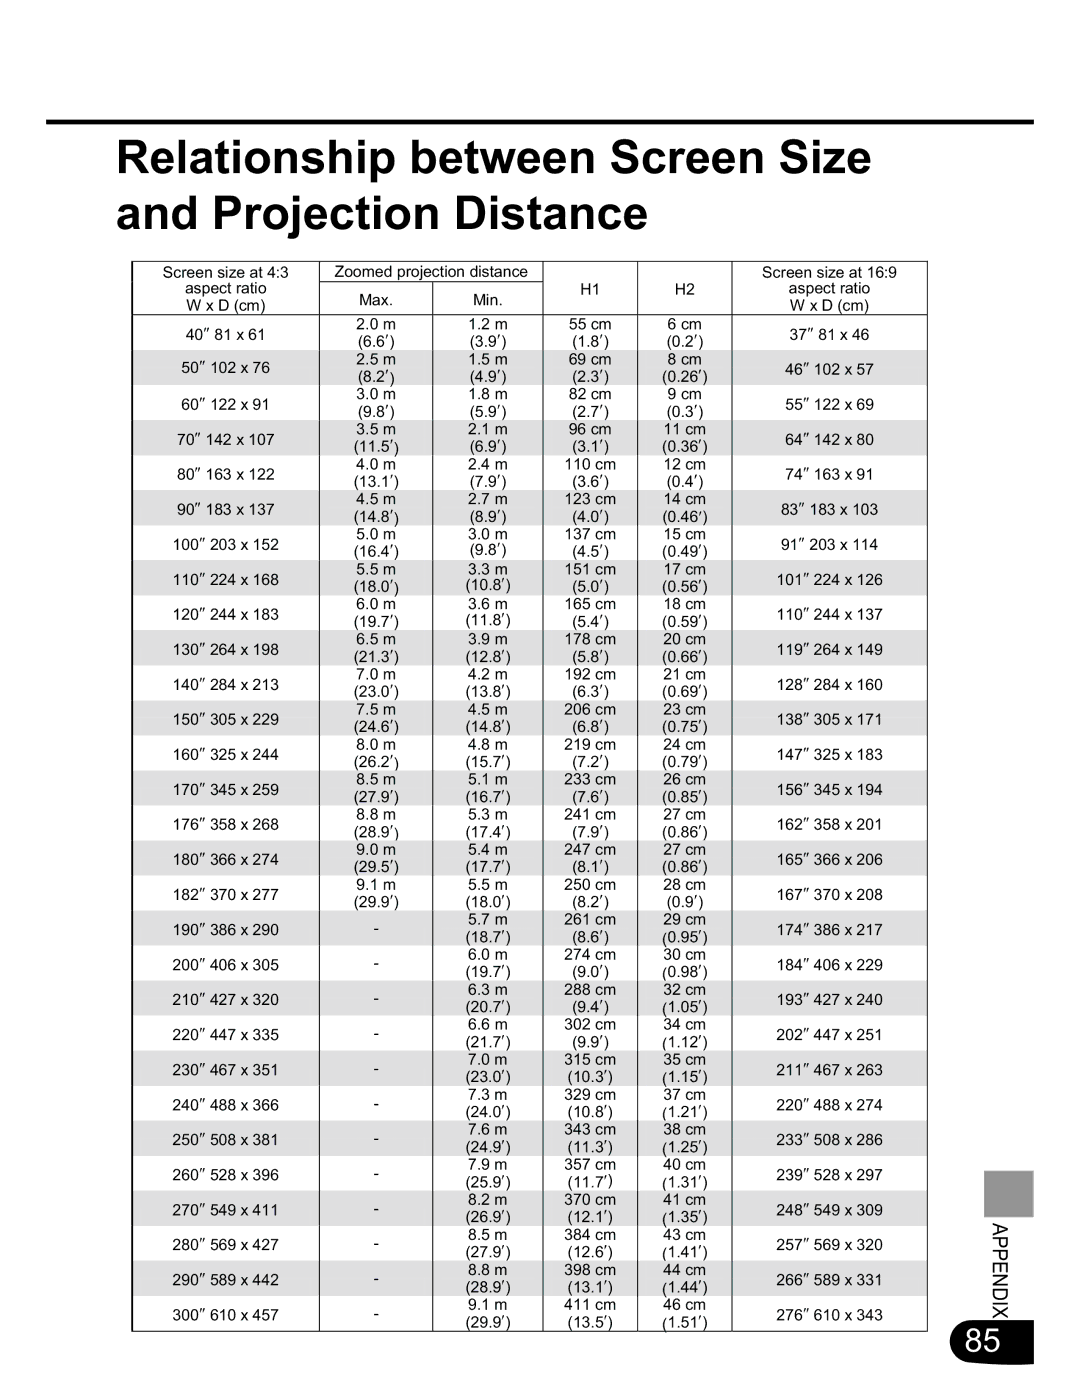 Canon SX20 manual Relationship between Screen Size and Projection Distance, 50 σ 102 x 69 cm 46 σ 102 x 